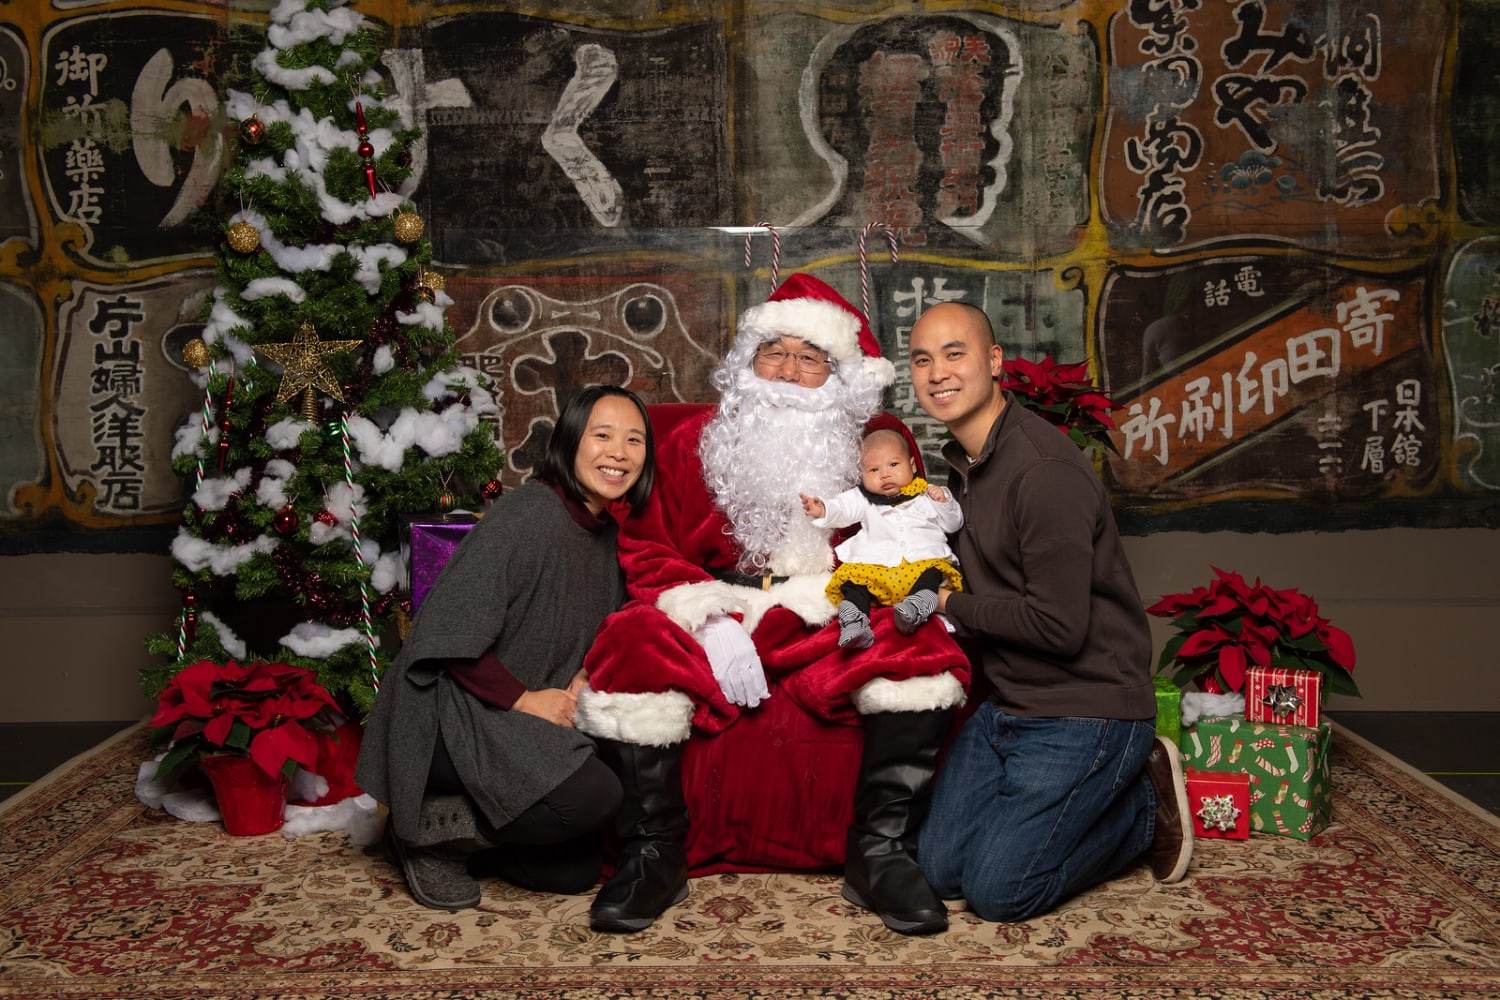 Seattle’s Asian American Santa is extra loud and jolly for a good reason